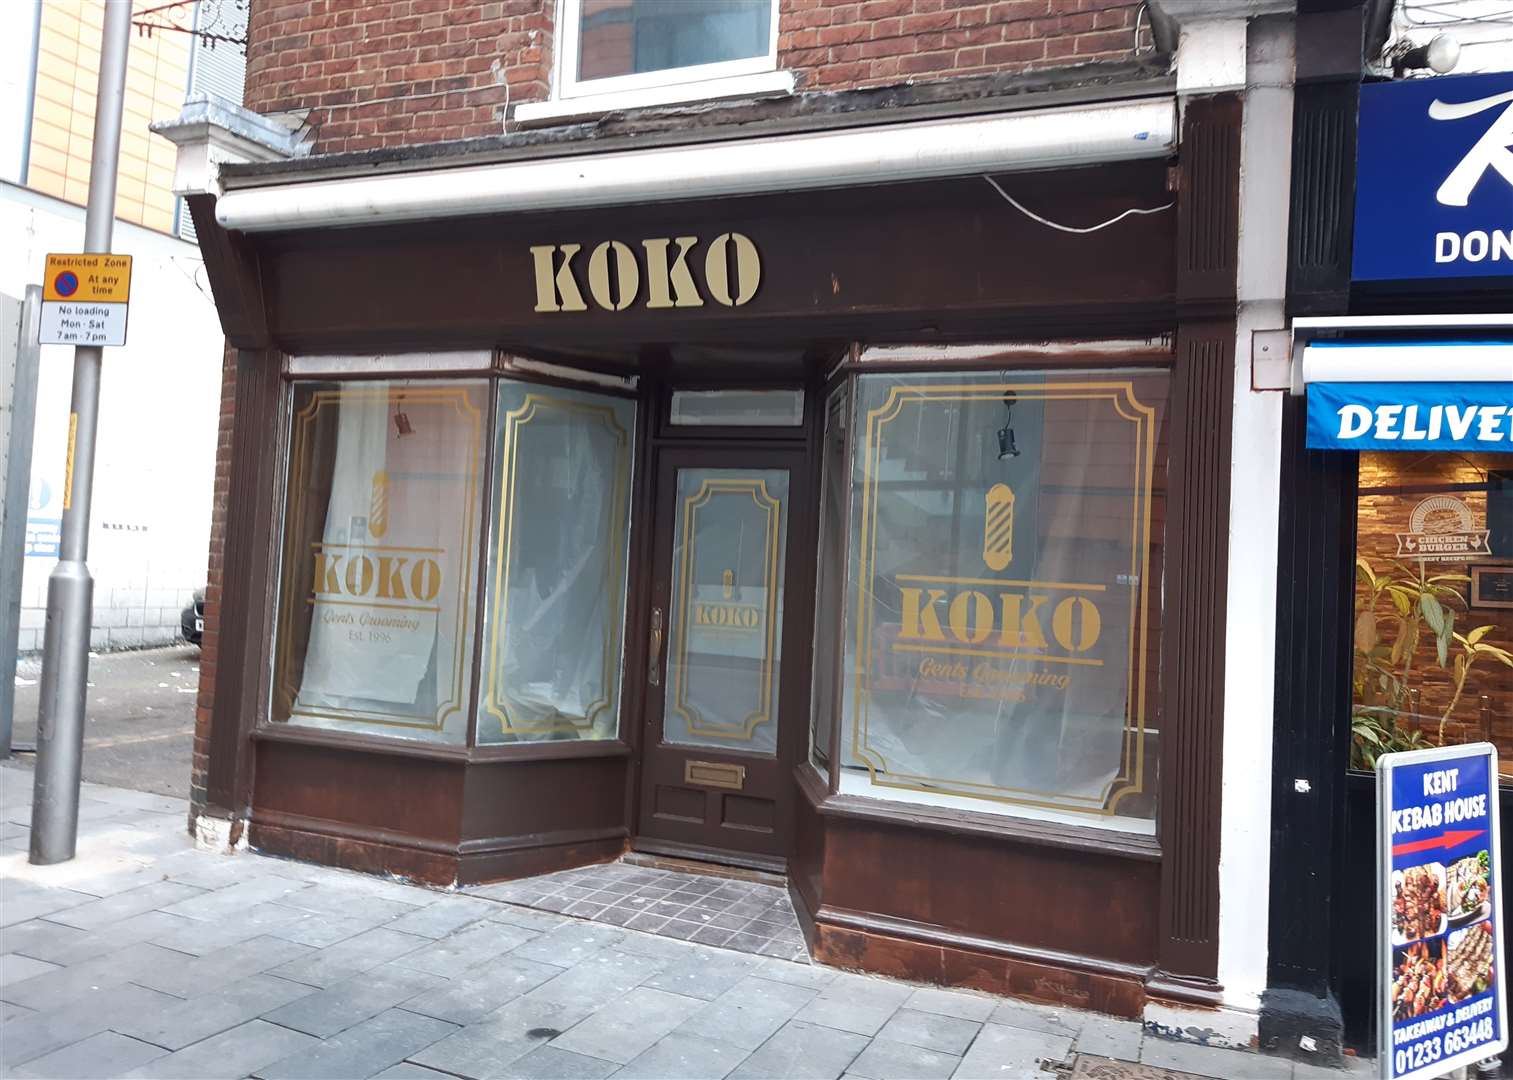 Koko Barbers is set to open another site off Bank Street